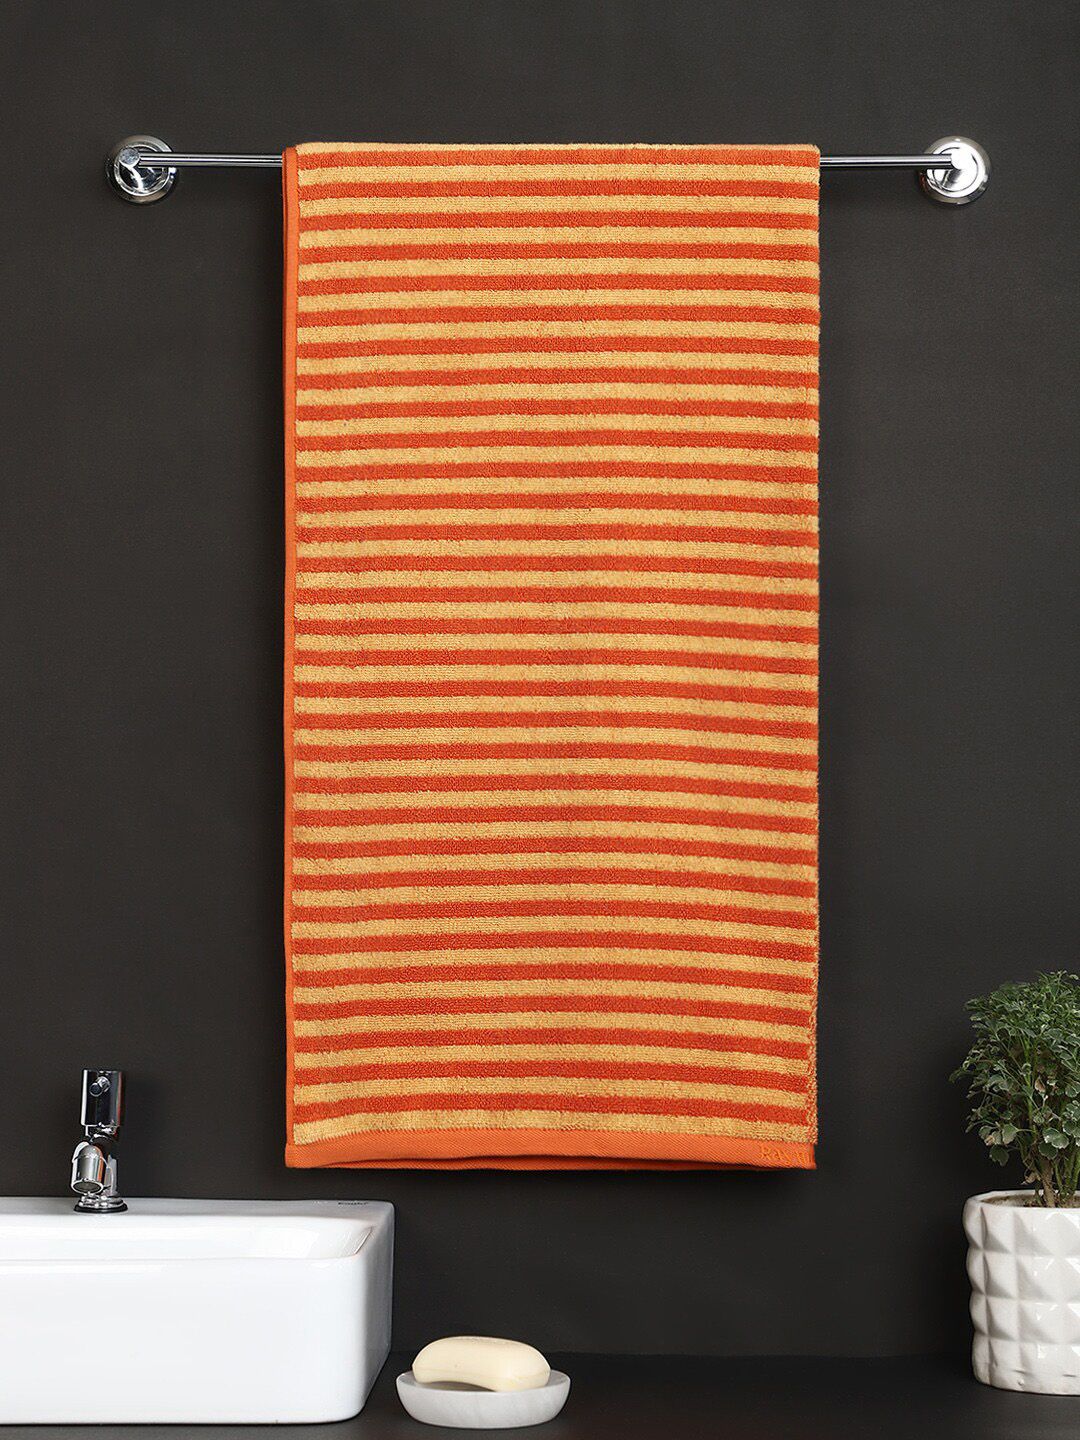 Raymond Home Yellow & Orange Striped Pure Cotton 500 Gsm Bath Towels Price in India